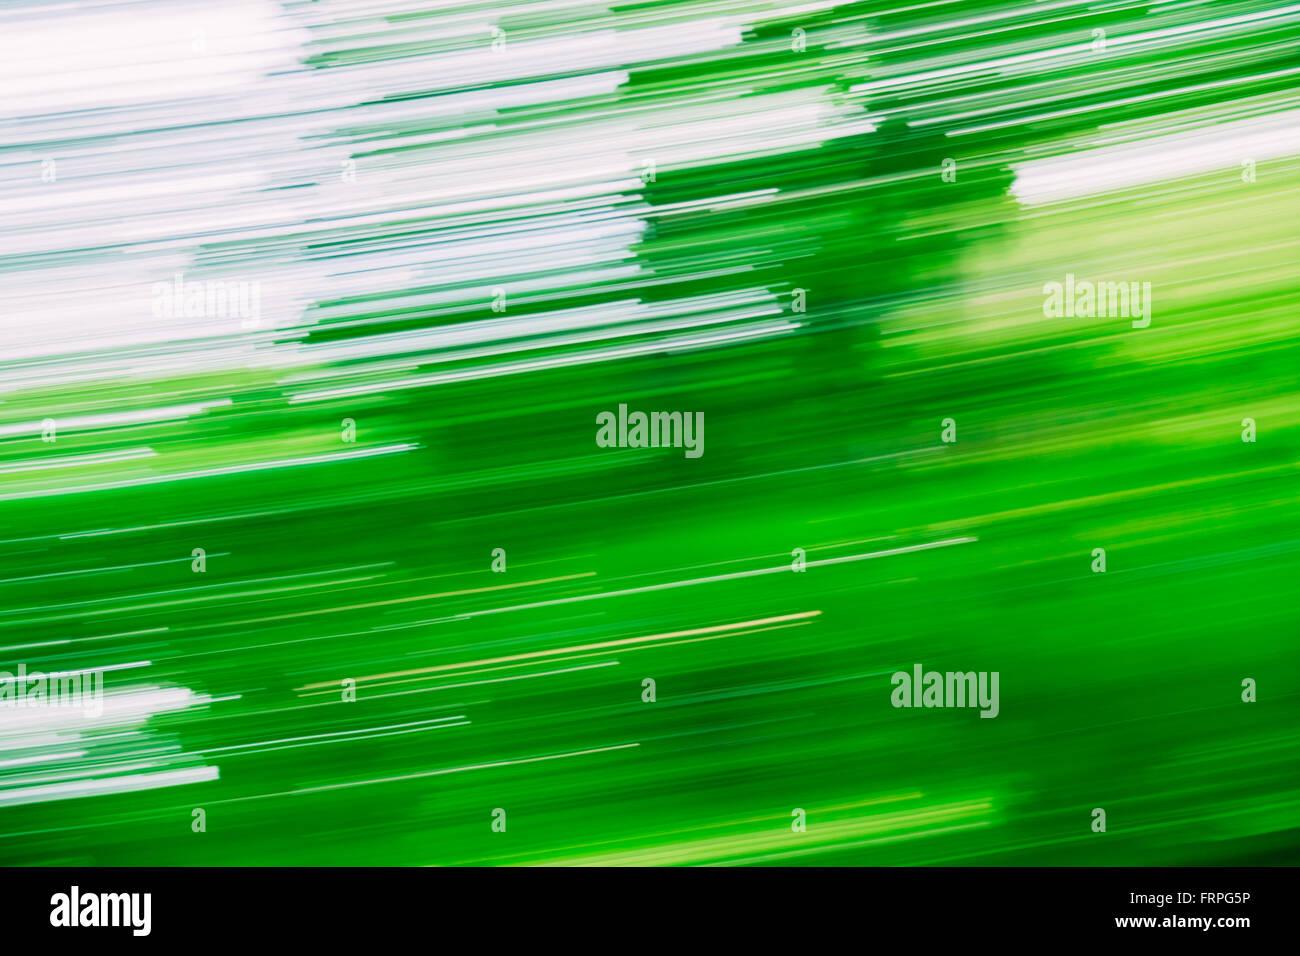 Light Abstract Natural Green Motions Background. Stock Photo